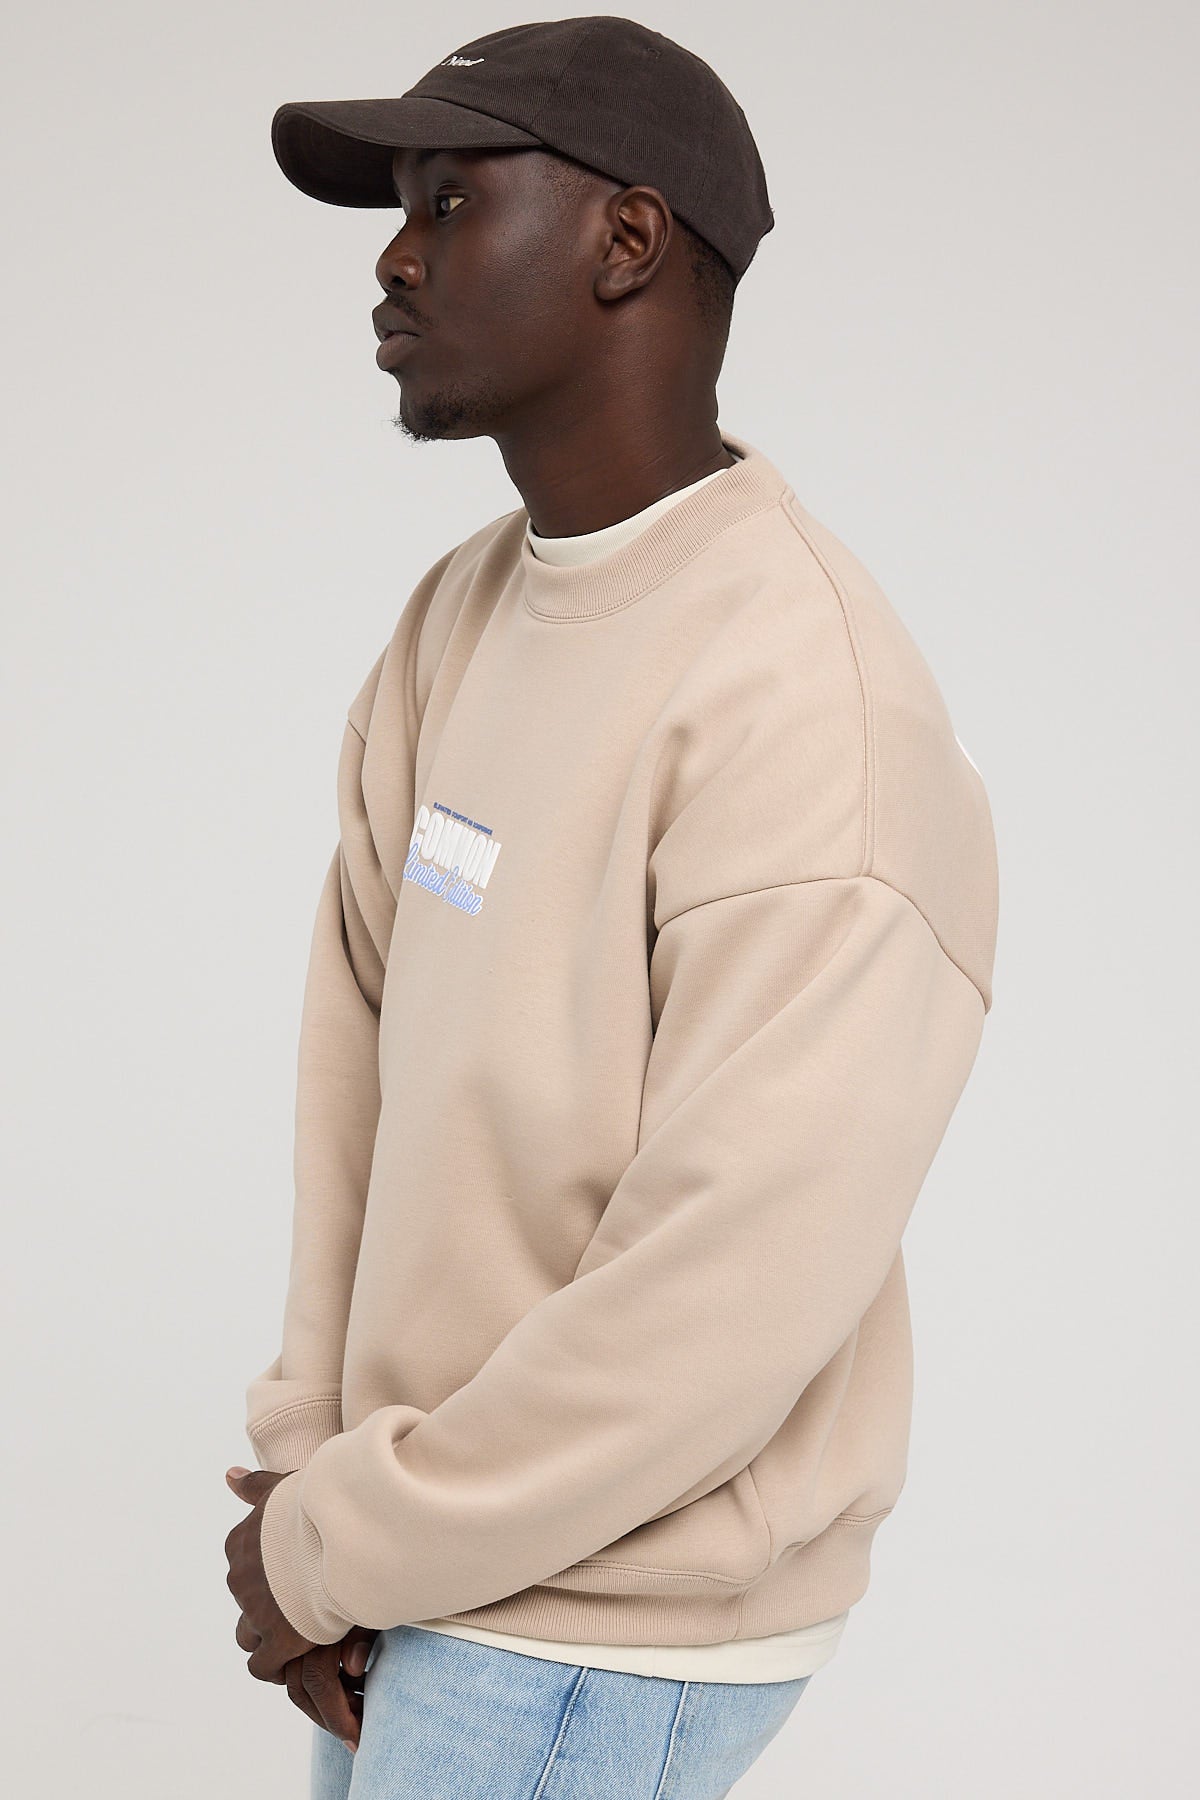 Common Need Limited Crew Sweater Brown